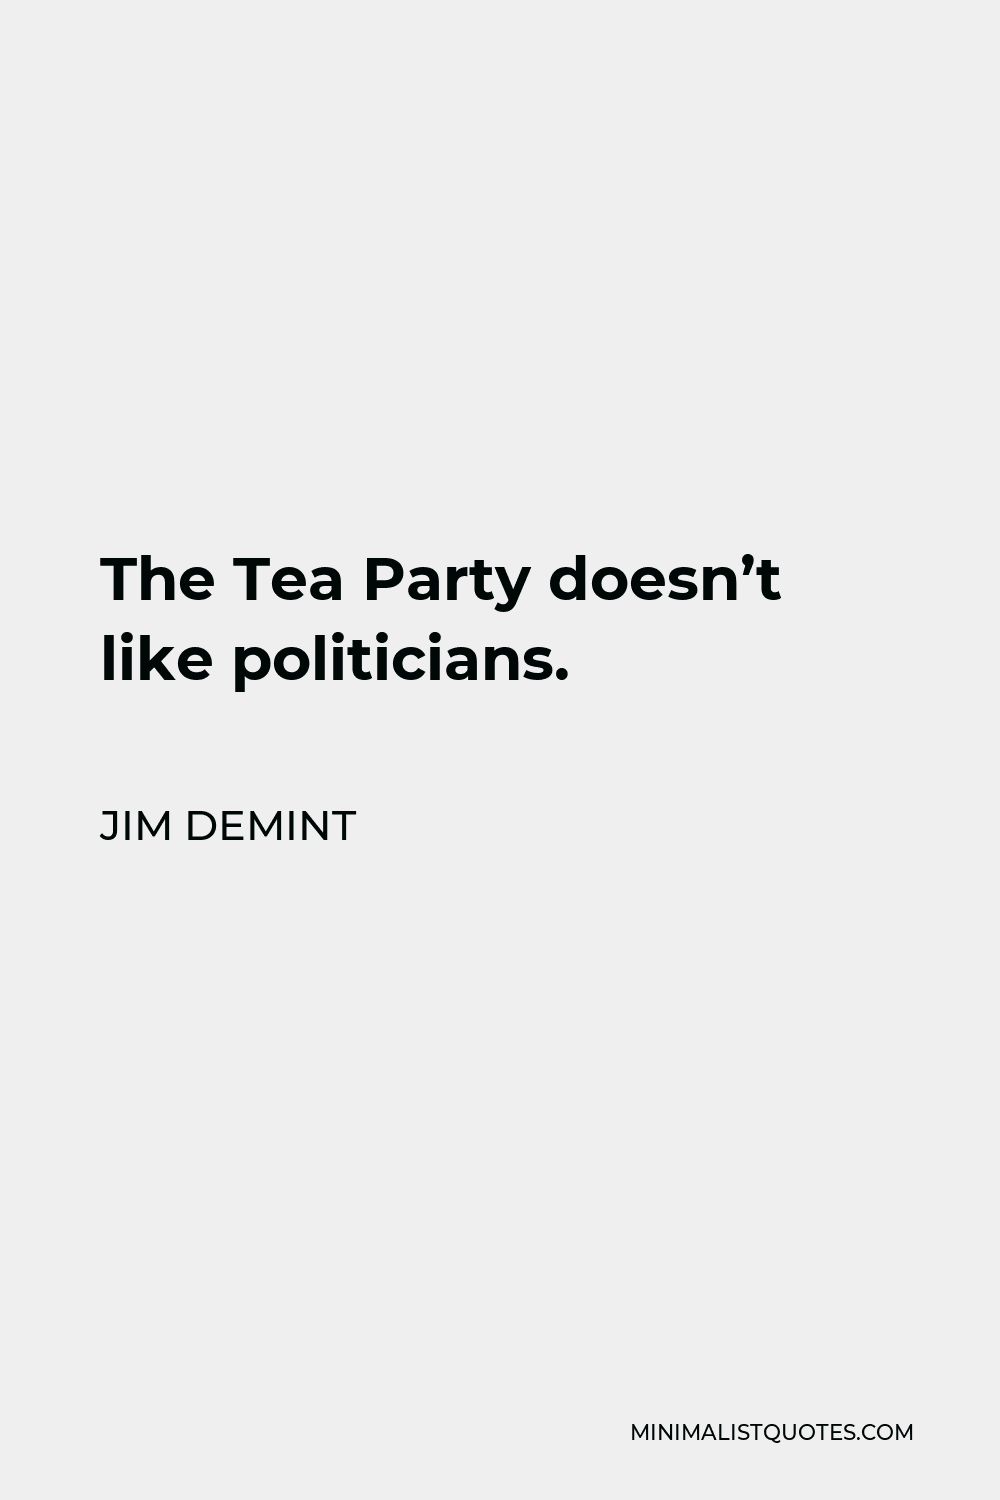 Jim Demint Quote The Tea Party Doesnt Like Politicians 1440